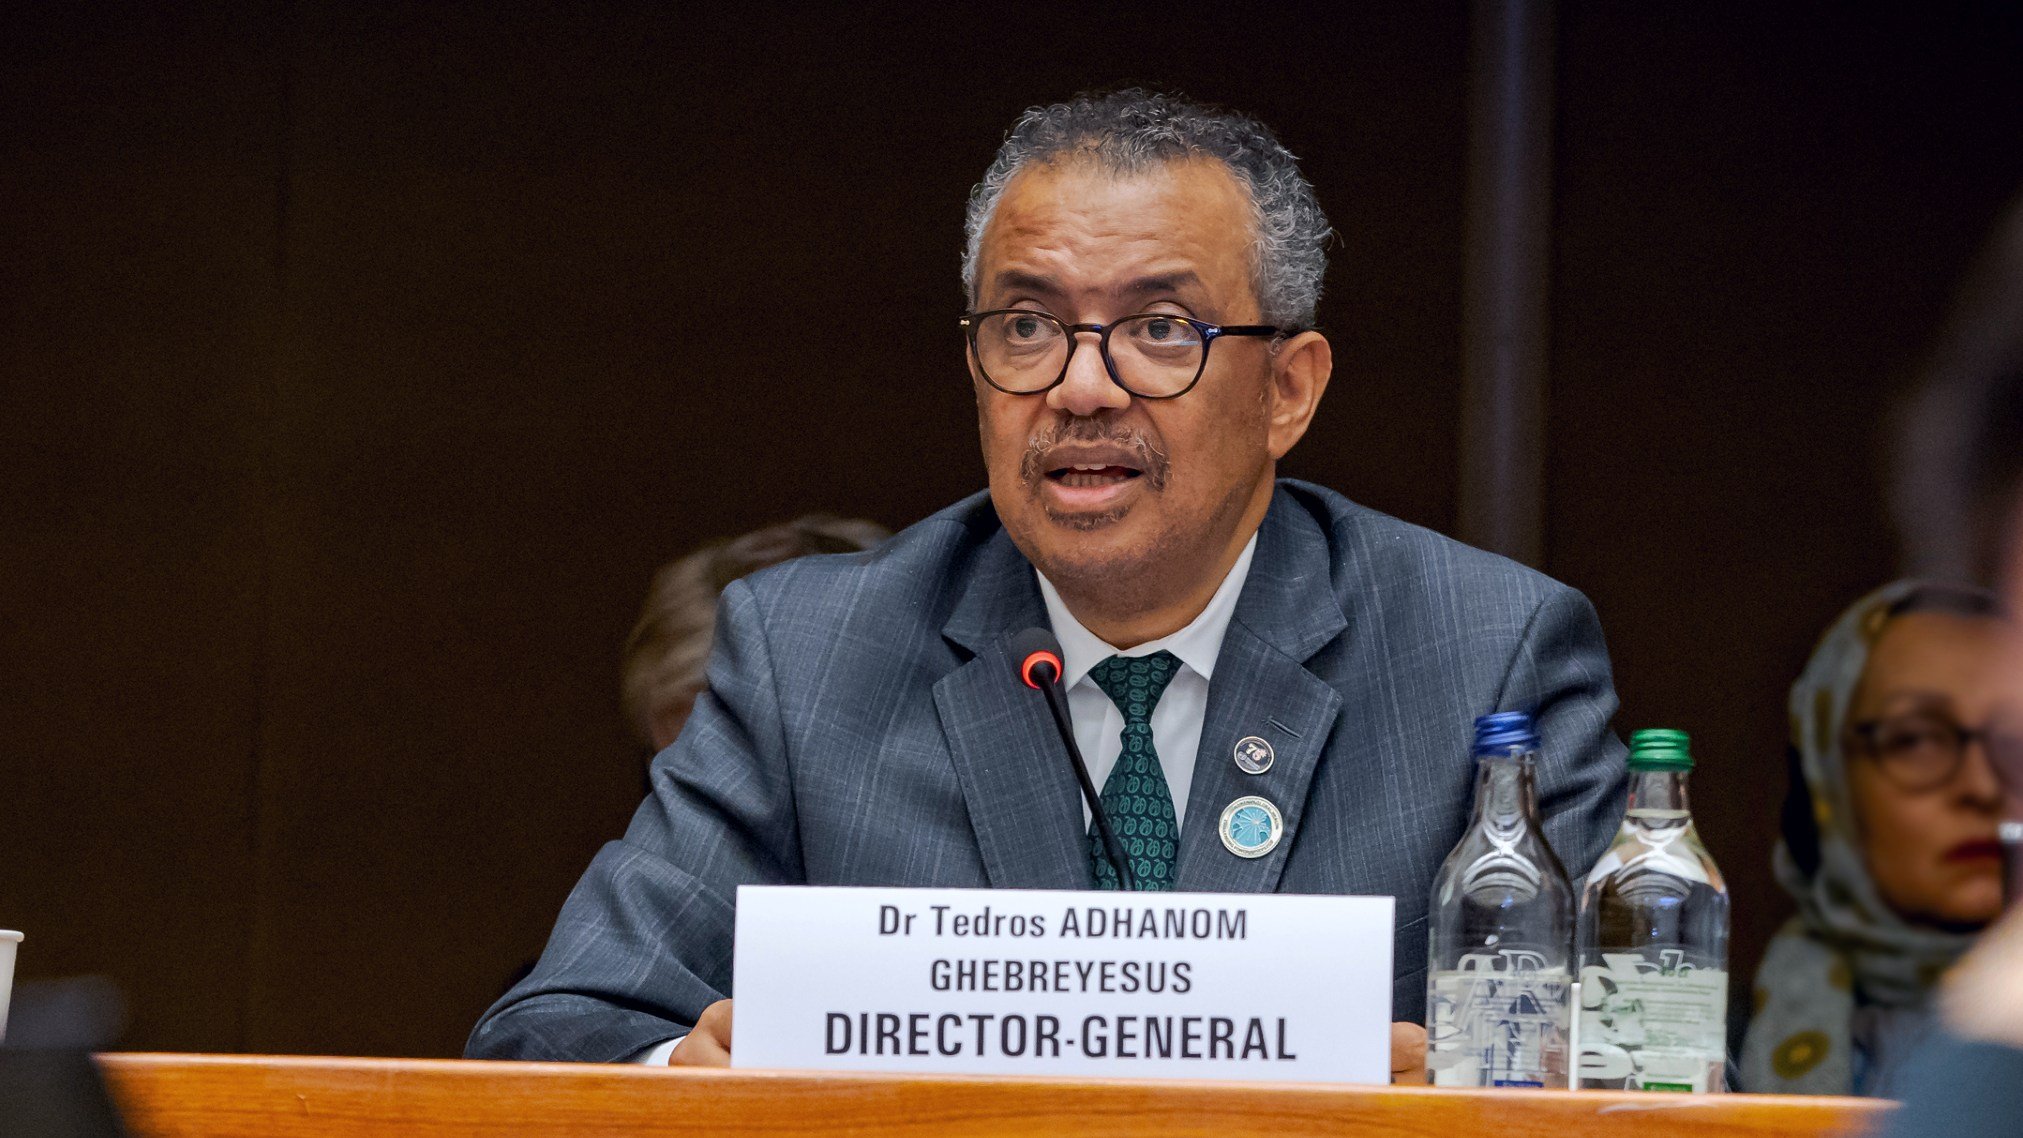 WHO Director-General Dr Tedros Adhanom Ghebreyesus giving his remarks at an event.